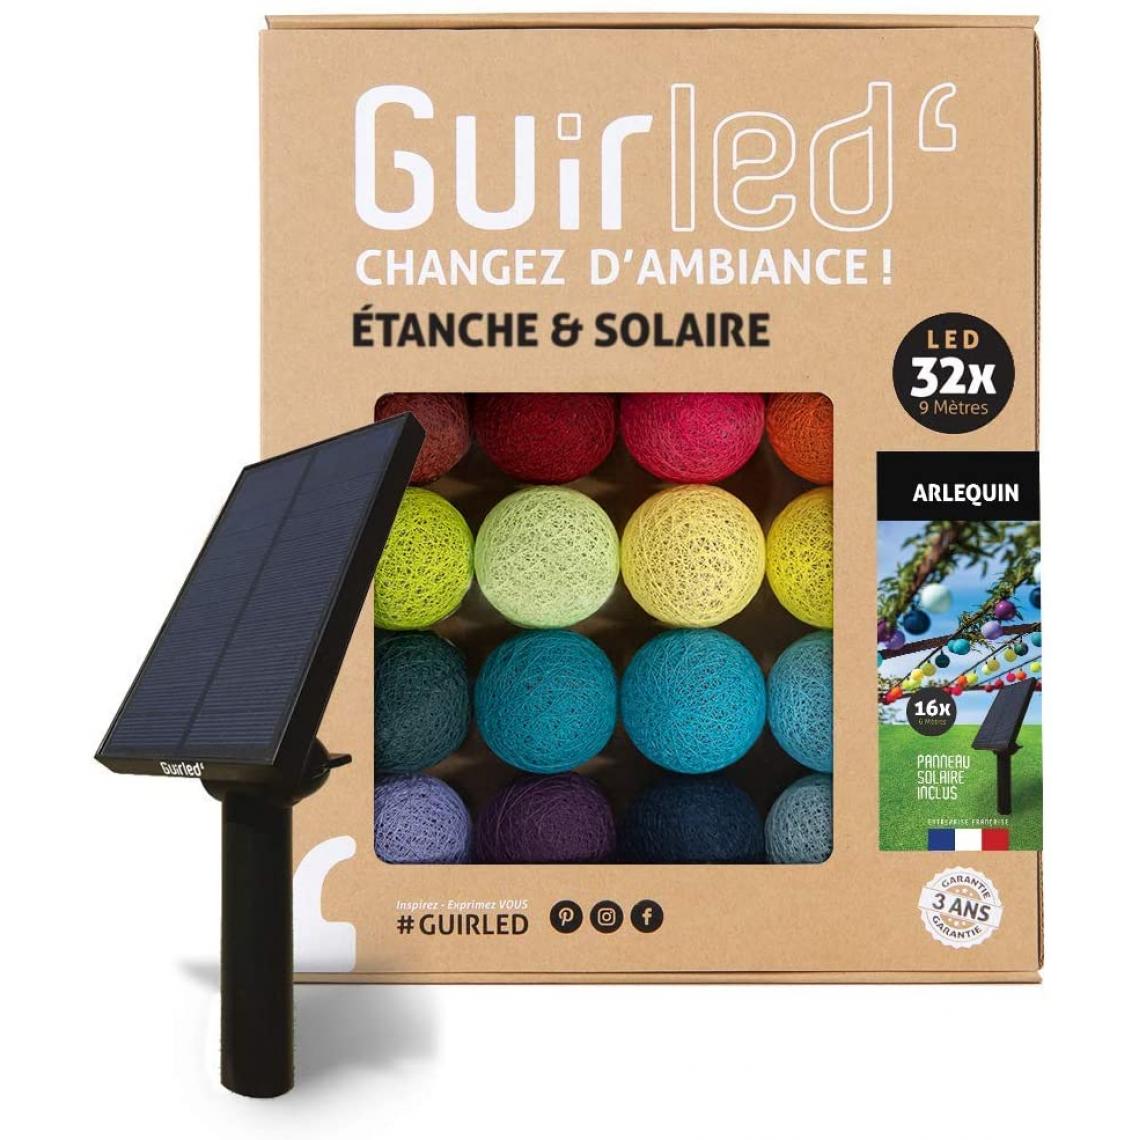 Guirled - Guirlande boule lumineuse 32 LED Outdoor - Arlequin - Eclairage solaire